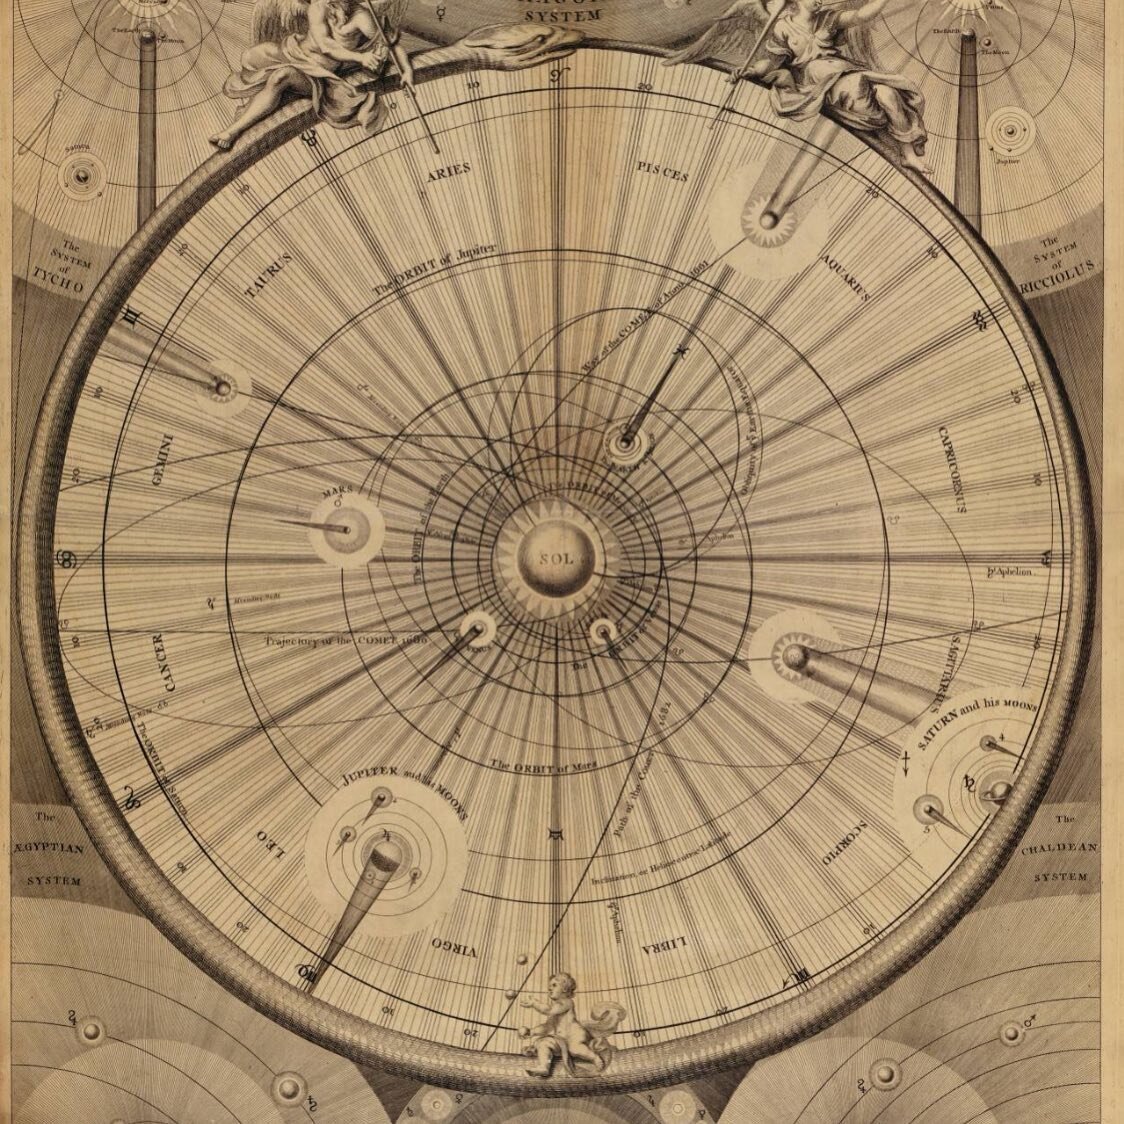 Map of the solar system. A synopsis of the universe, or, the visible world epitomiz'd. 1742.

Found in the library of congress.

#oldmaps
#theuniverse